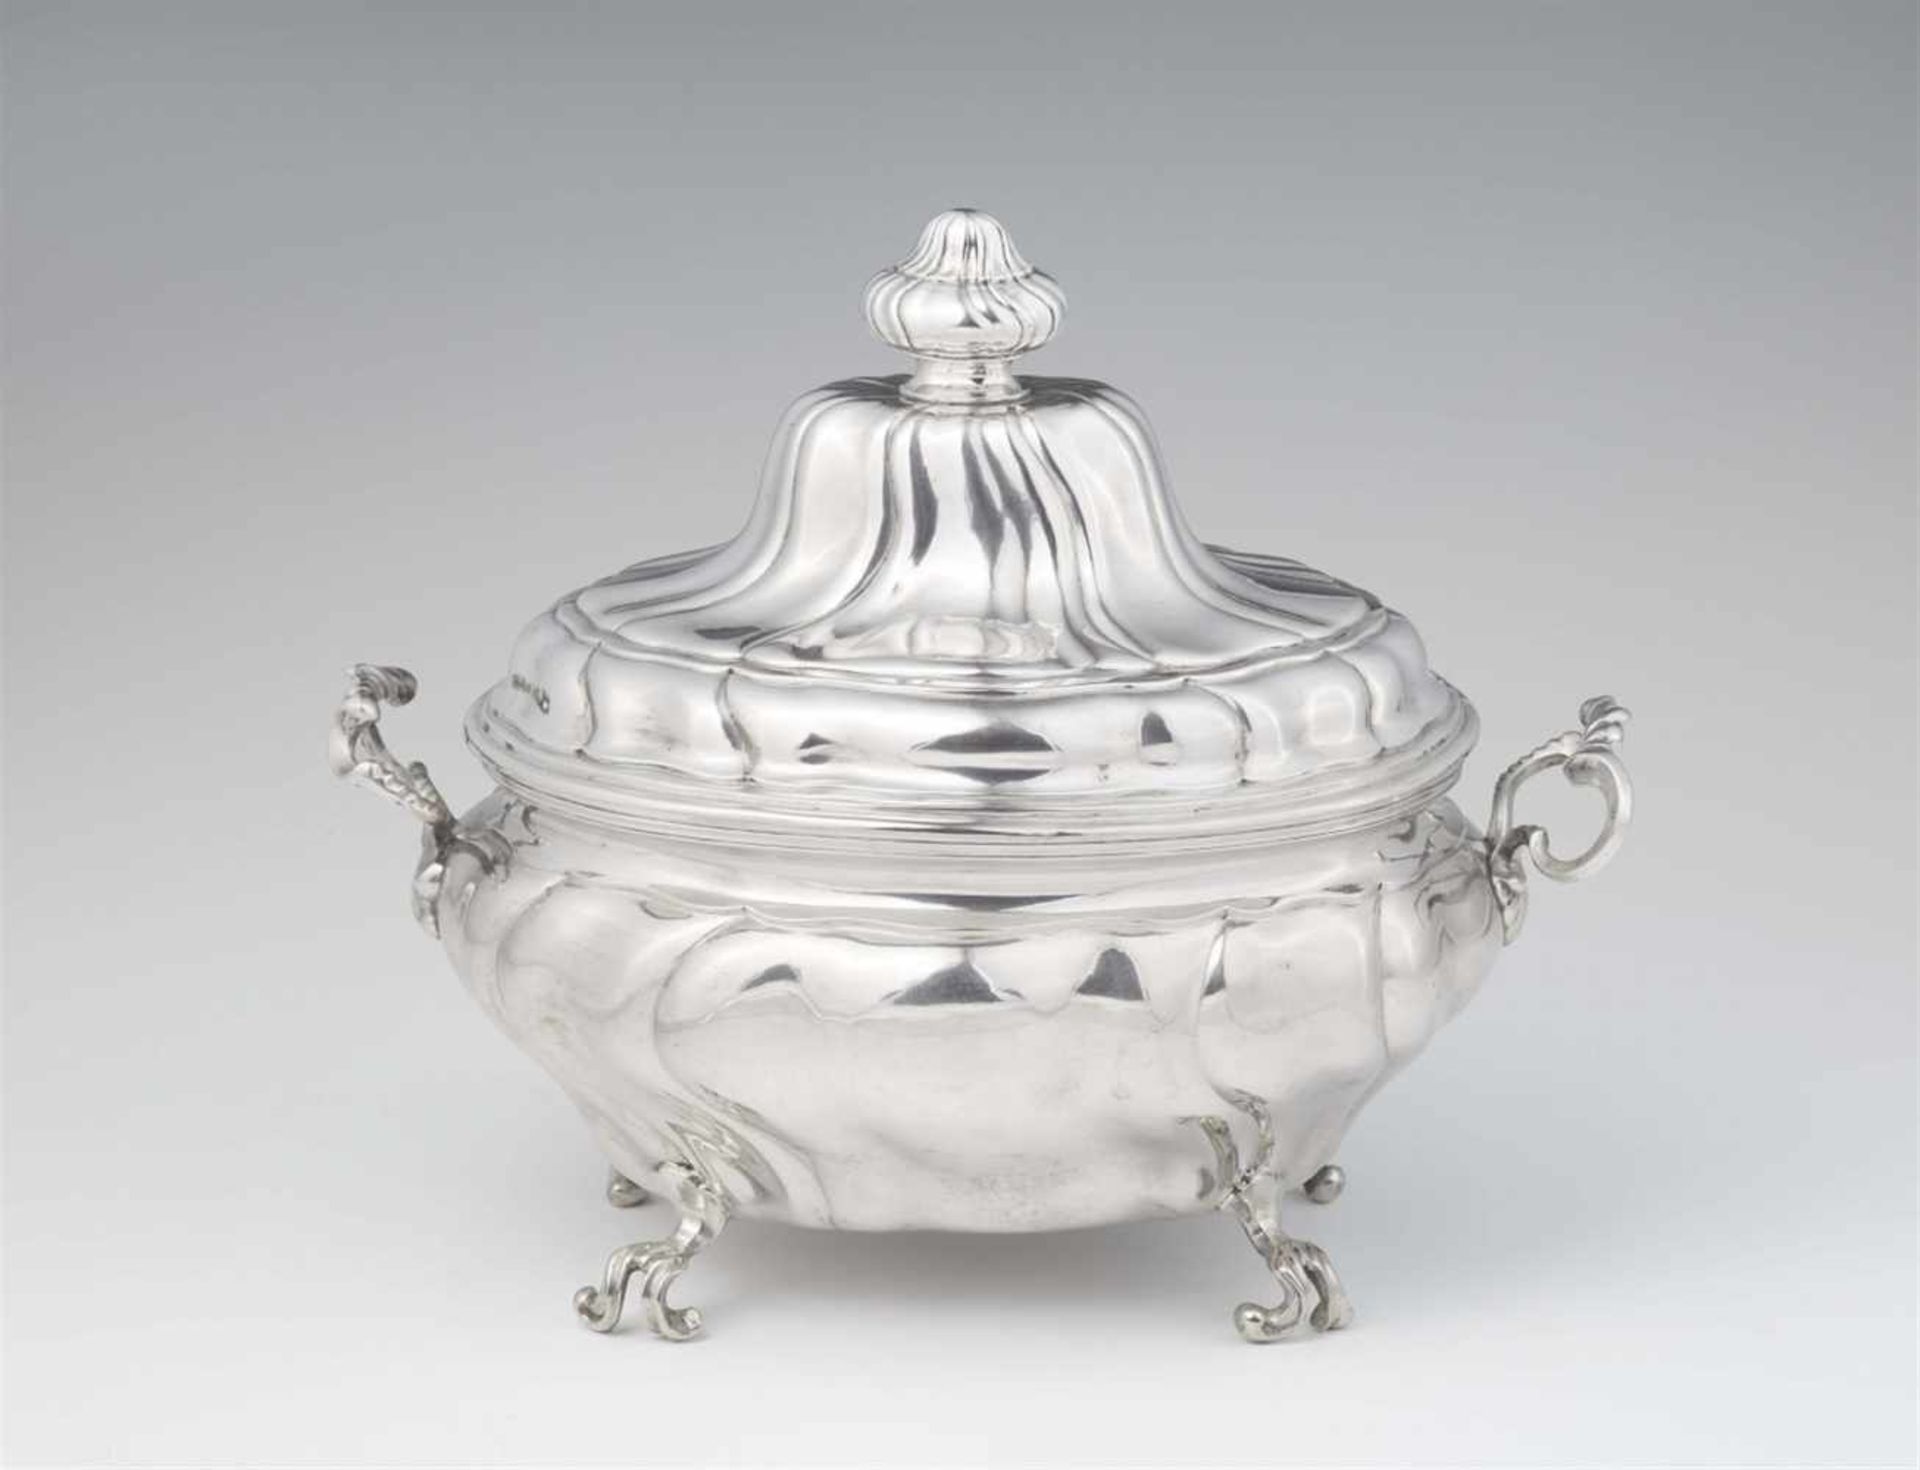 A Bautzen silver tureen and coverInterior gilt bombé form tureen with twist fluted decor and handles